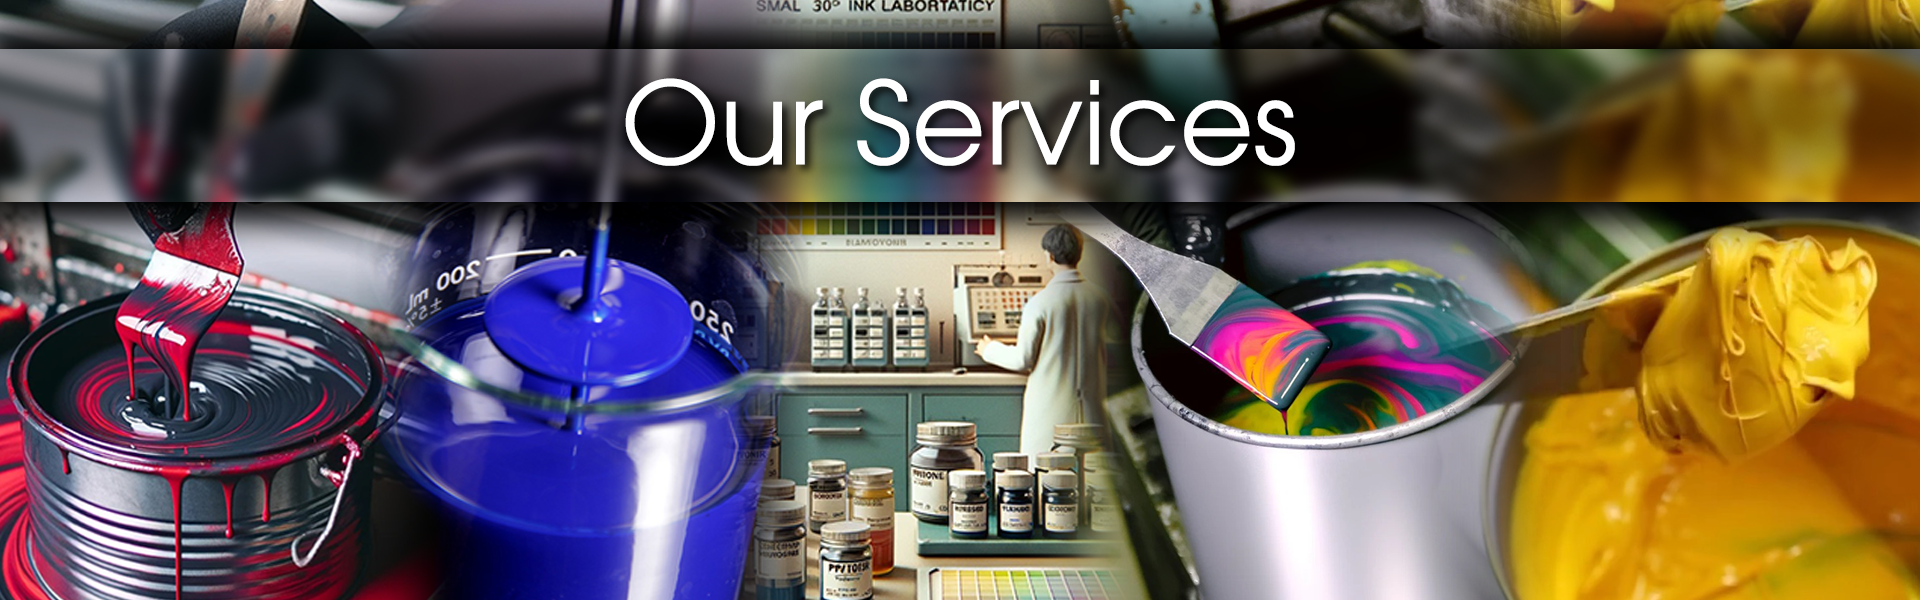 Spinks india Services banner 